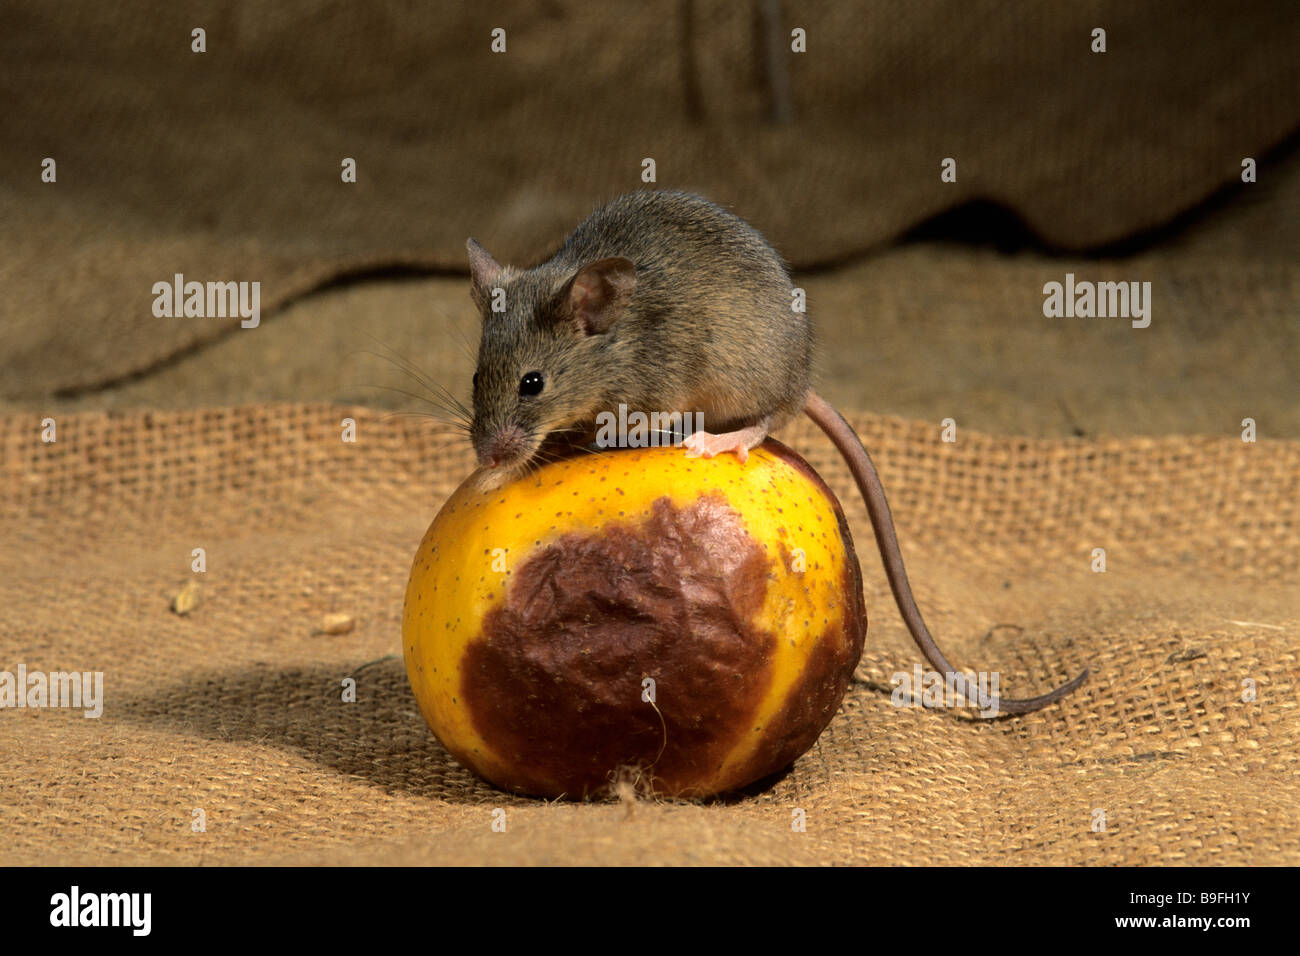 House Mouse (Mus musculus) sitting on rotting apple Stock Photo